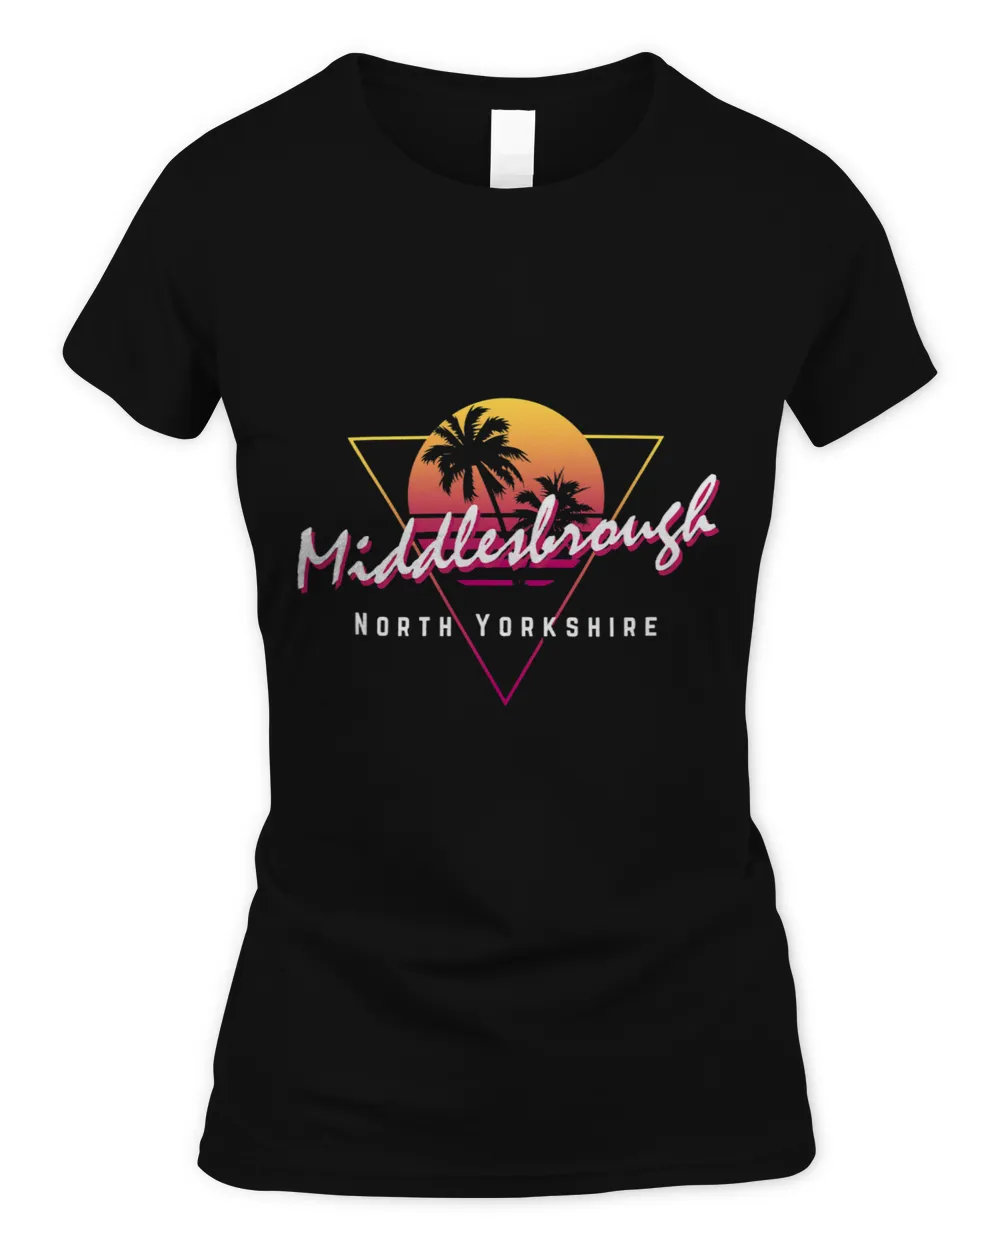 Yorkshire Terrier Middlesbrough North Yorkshire 80s Retro graphic Funny Sunset Yorkie